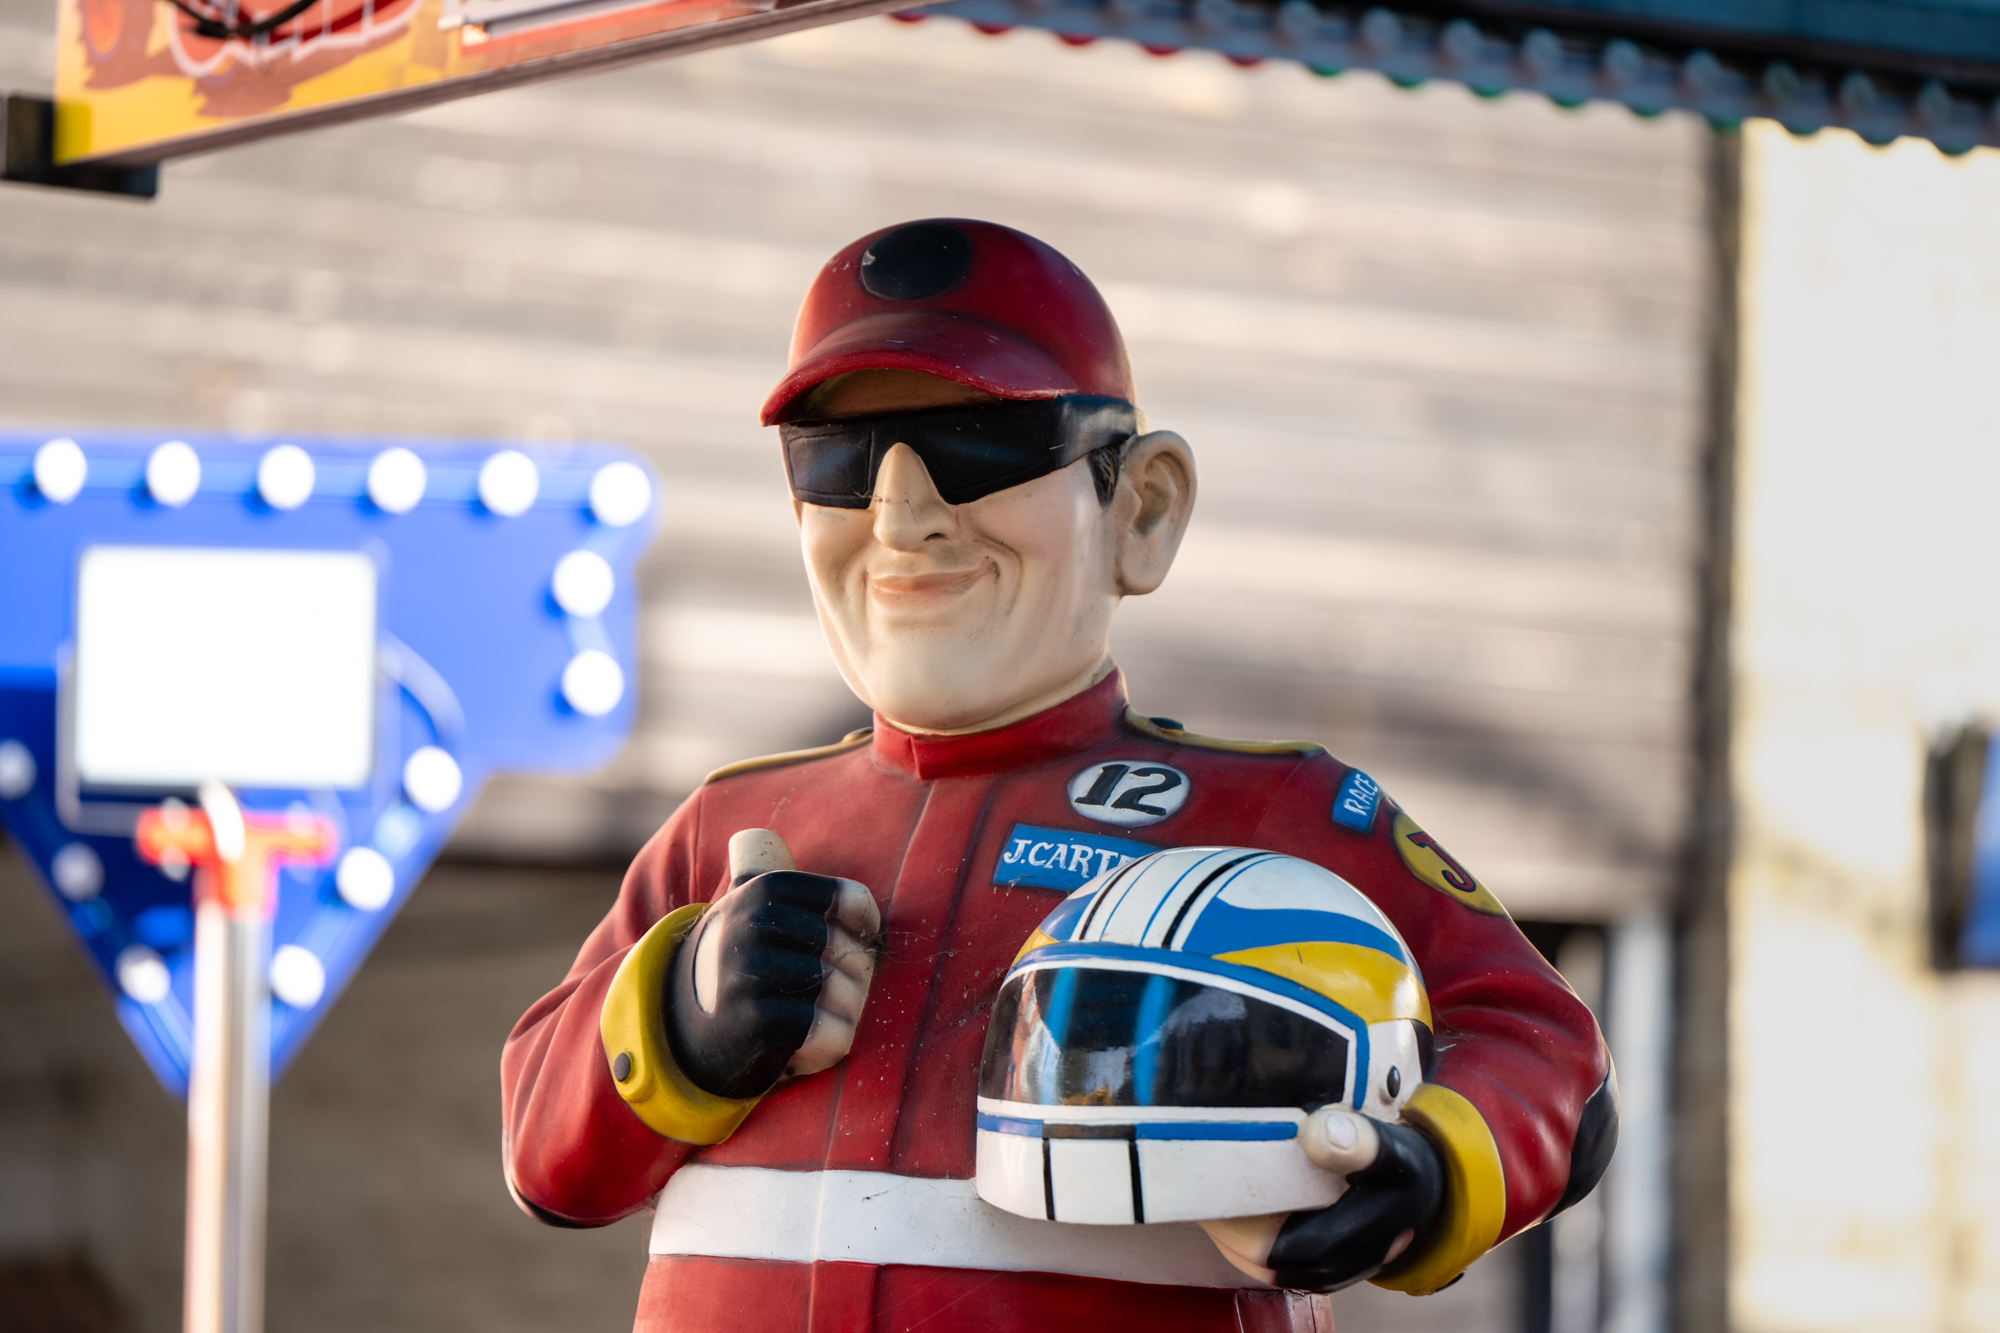 Photo of a fairground ride character taken with the Nikkor Z 70-180mm f/2.8